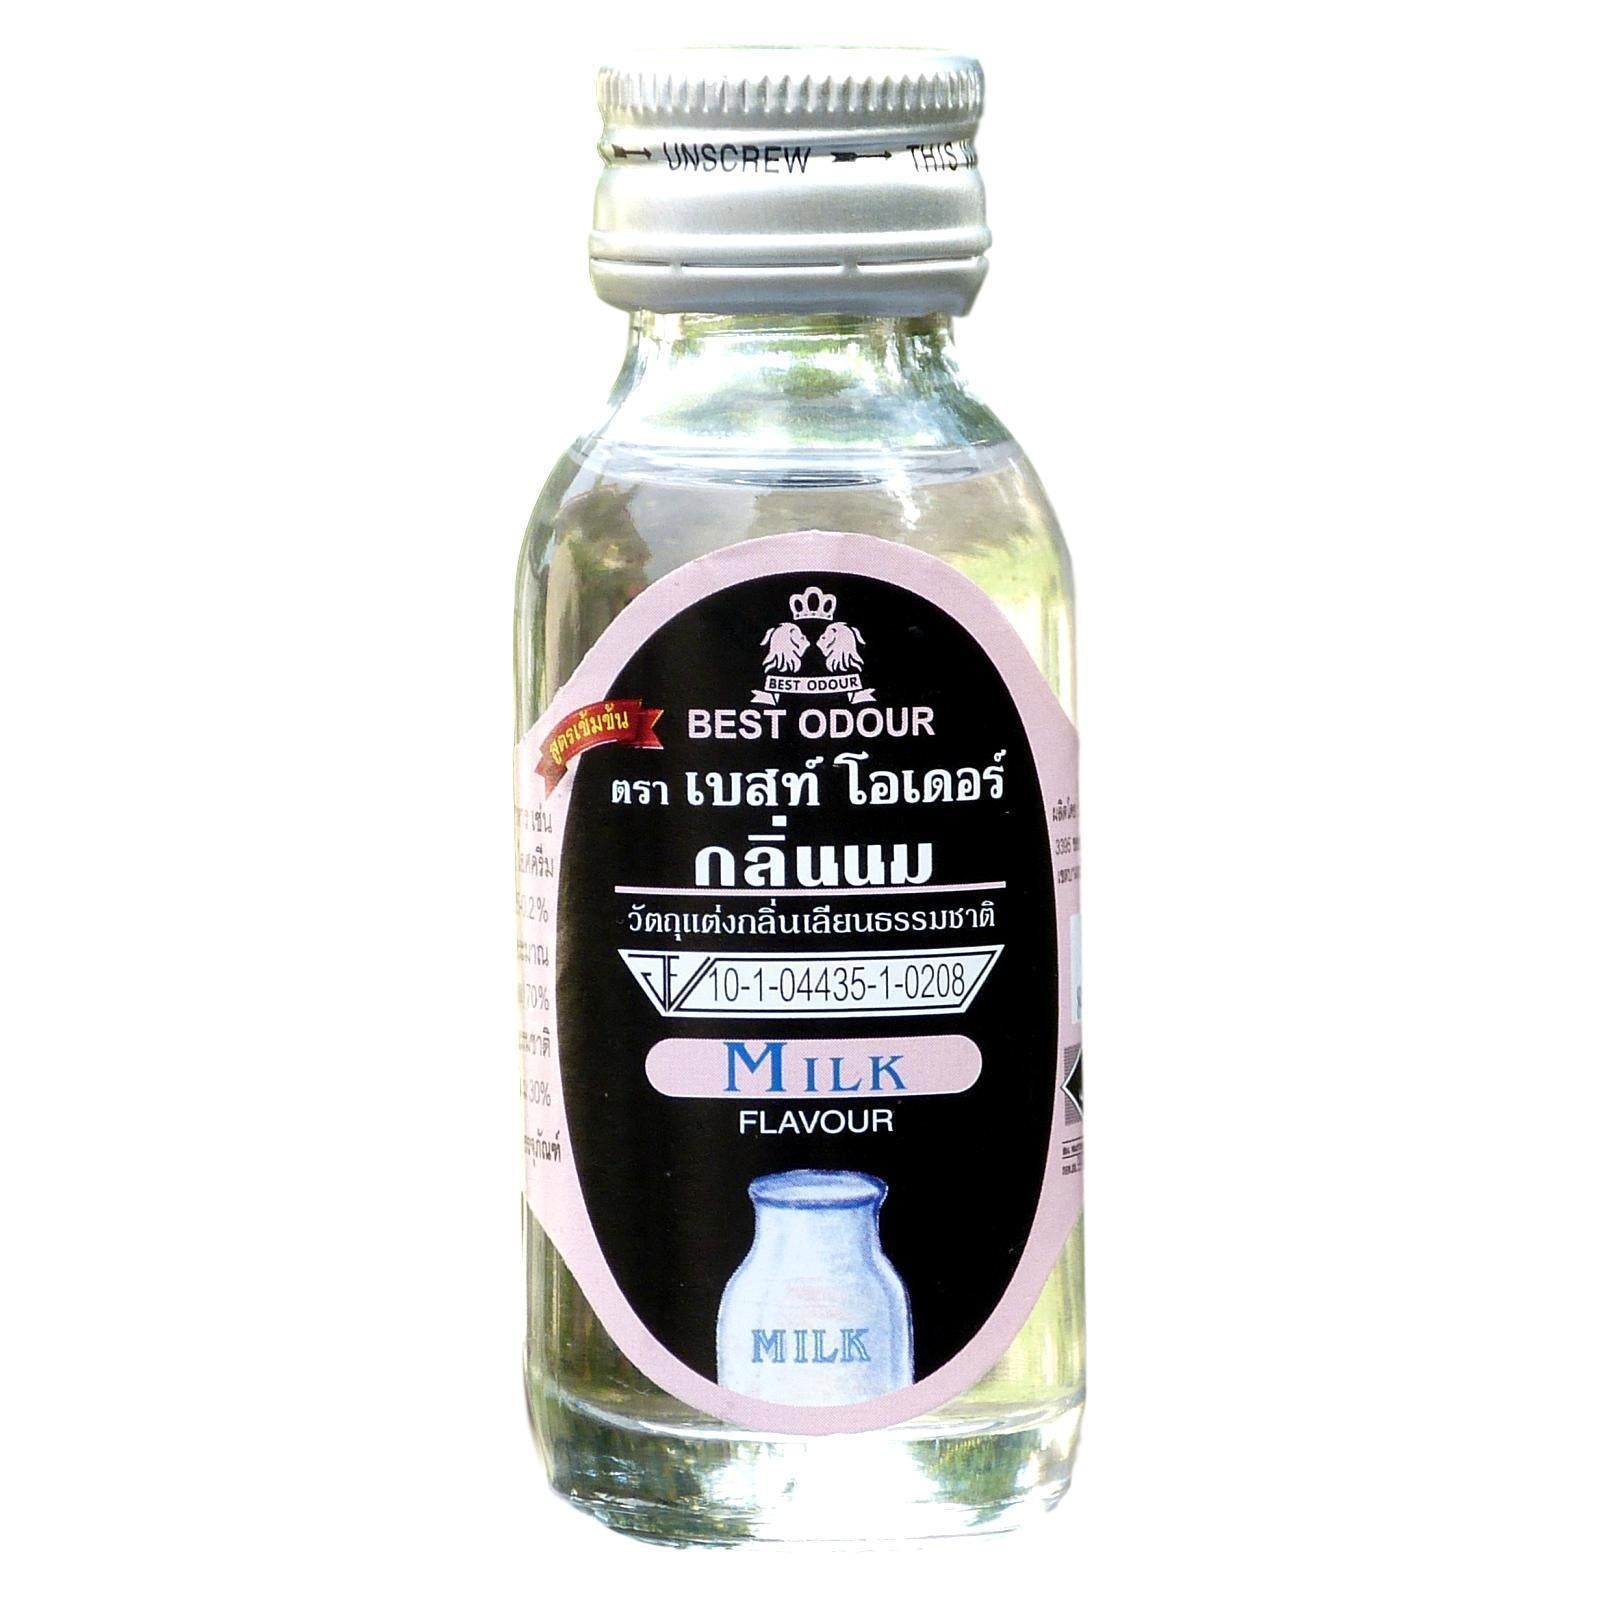 Best Odour Milk Flavor for Thai Food and Drinks 30ml